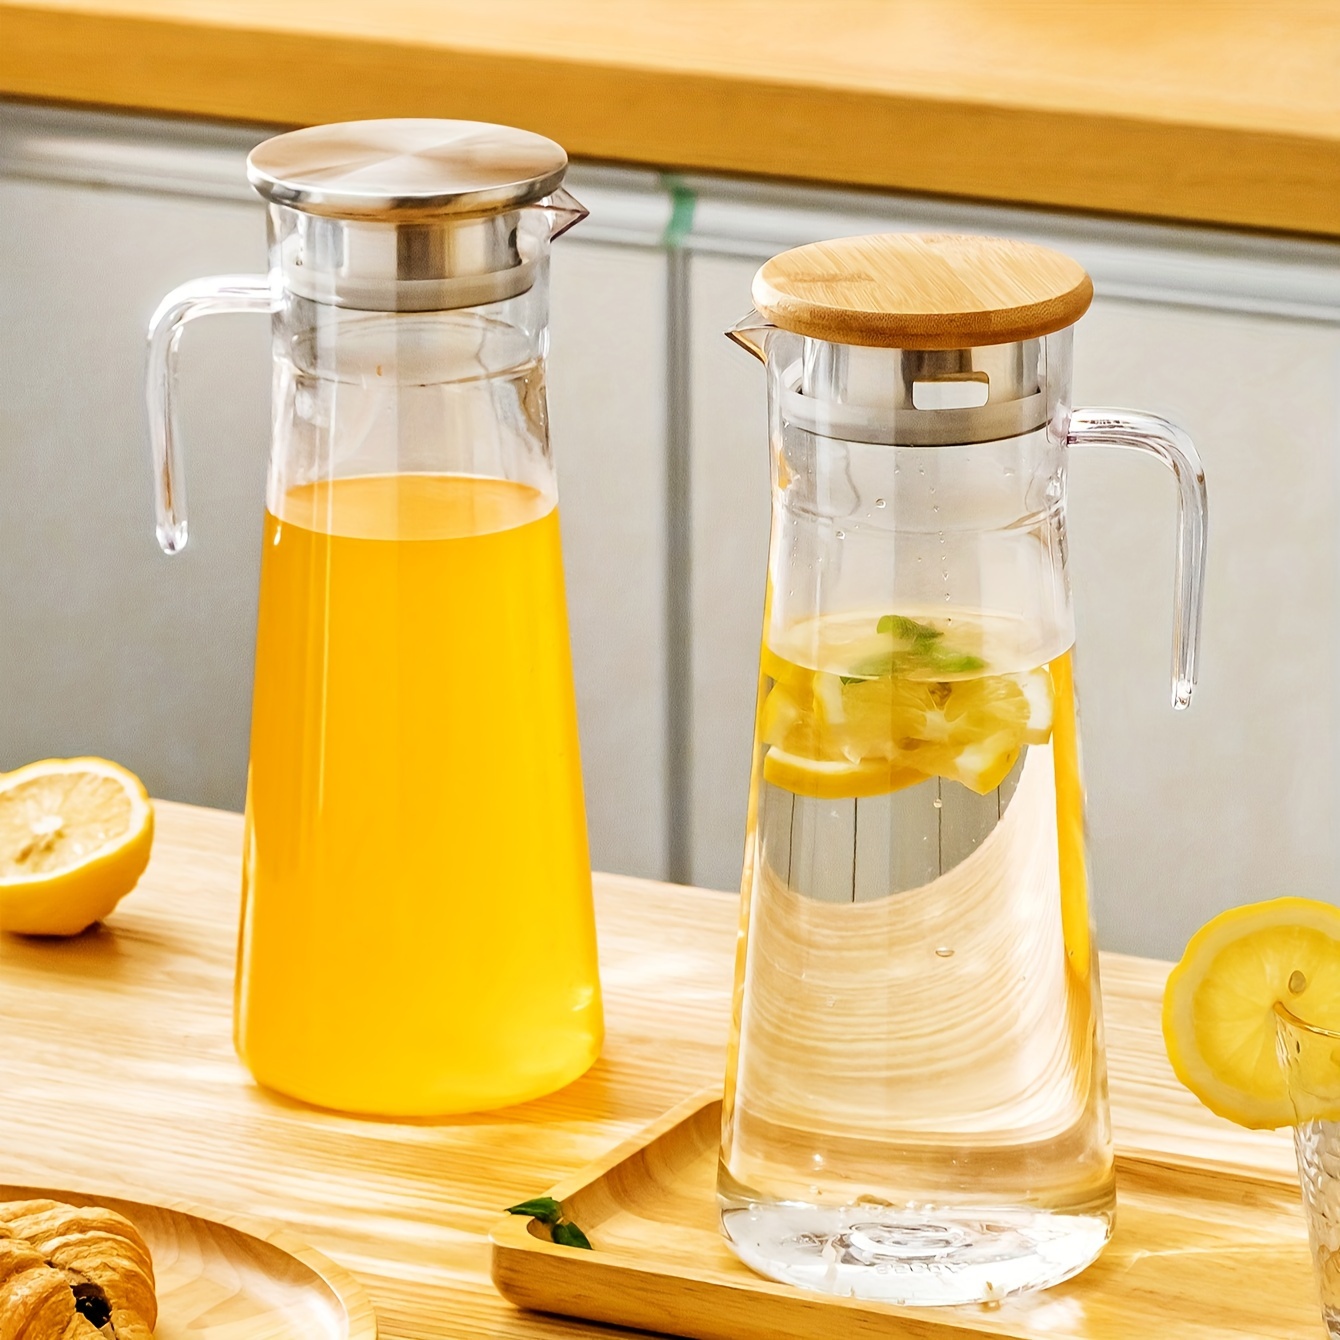 

1pc Water Pitcher With Lid & Spout - Hot/cold Beverages, Heat-resistant, Ideal For Iced Tea, Lemonade, Refreshments